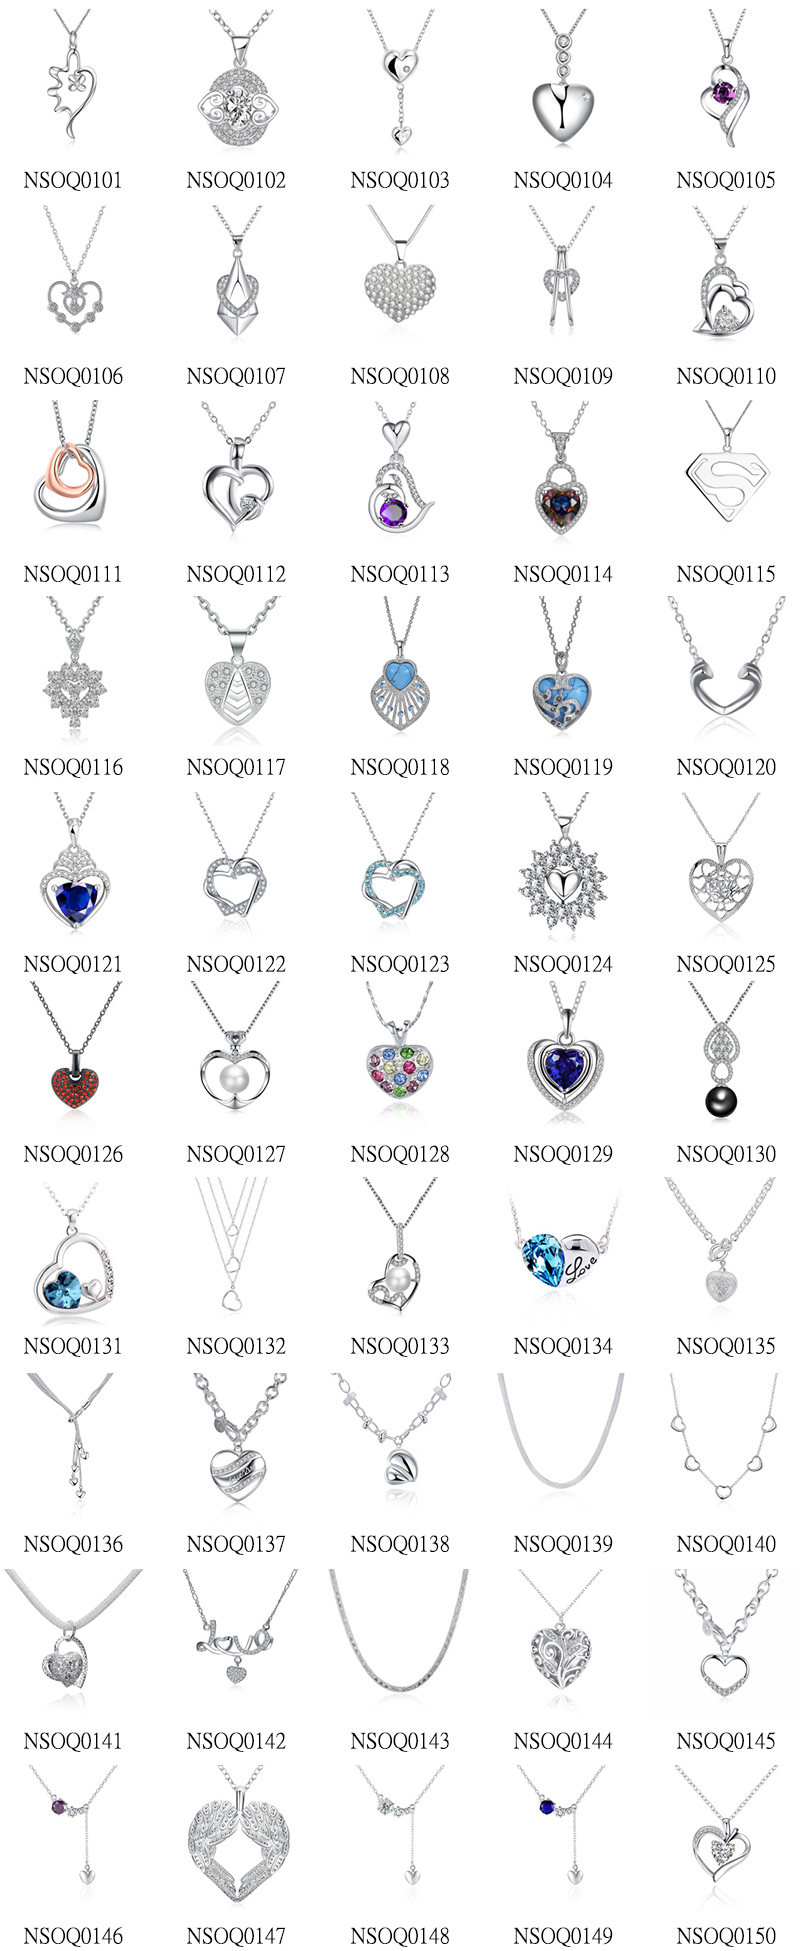 260+ Heart Shaped Pendant Designs for NOW and BEYOND